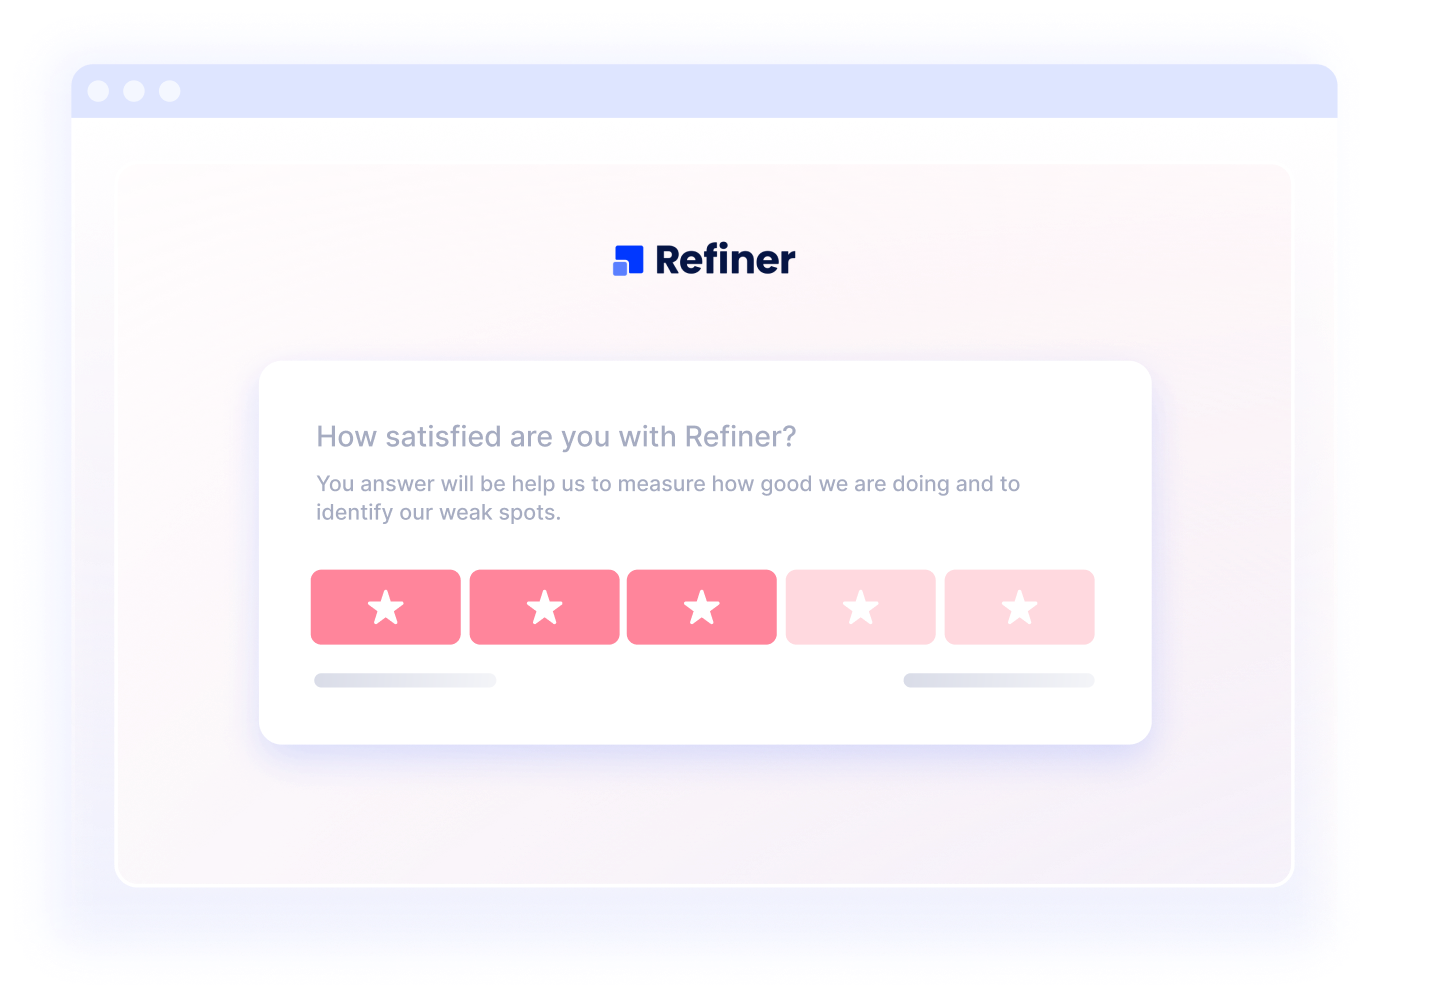 Get Started: Create your First Survey – SurveyHero Help Center